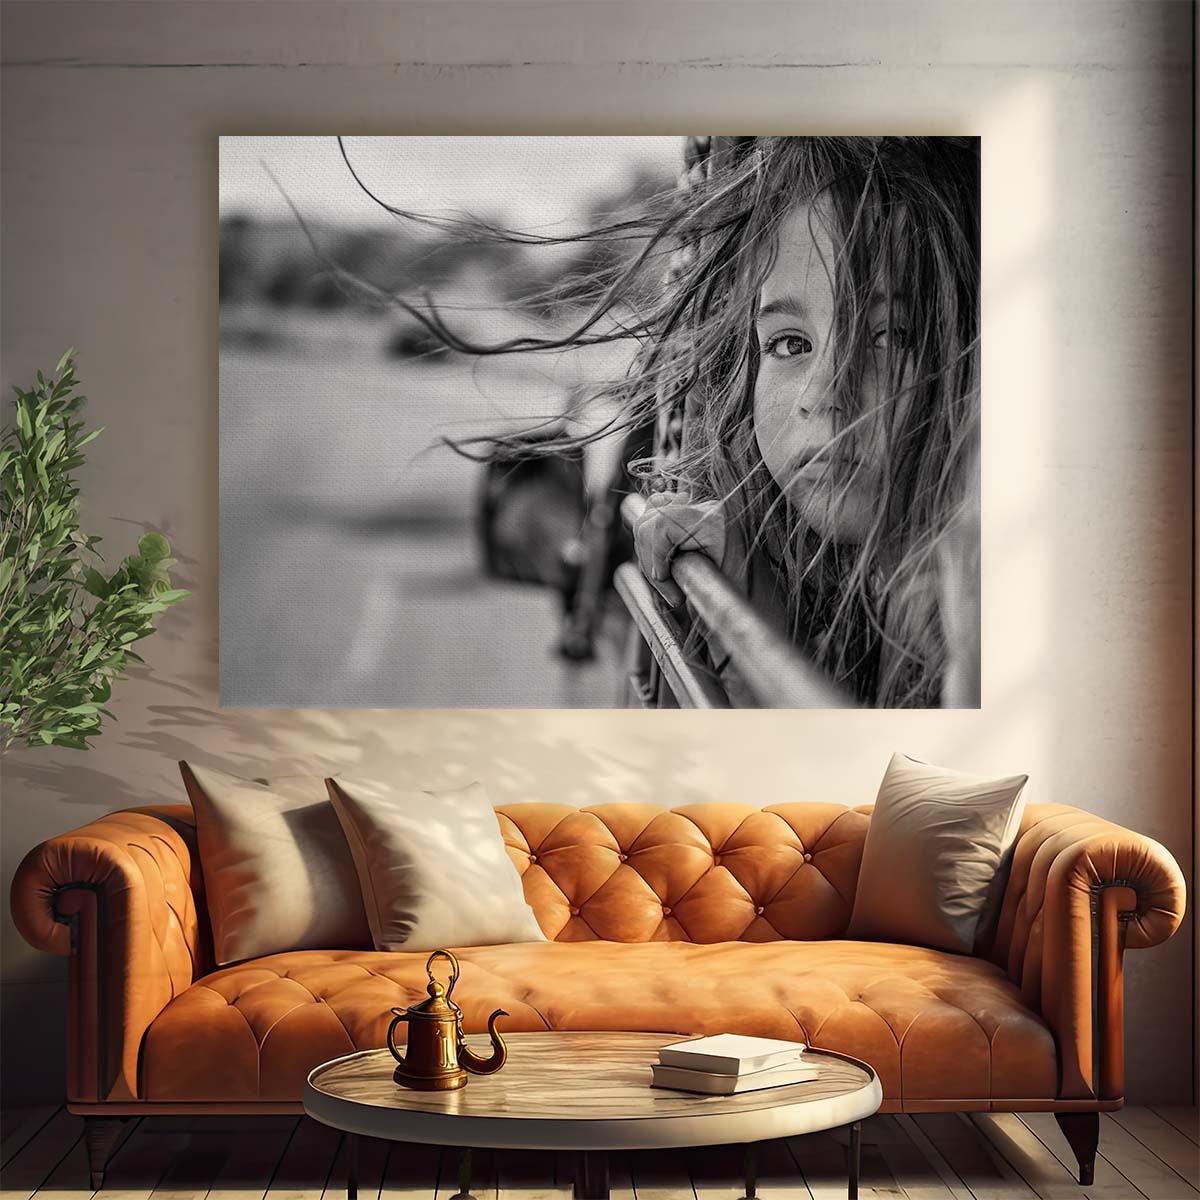 WindSwept Girl Portrait in Monochrome Wall Art by Luxuriance Designs. Made in USA.